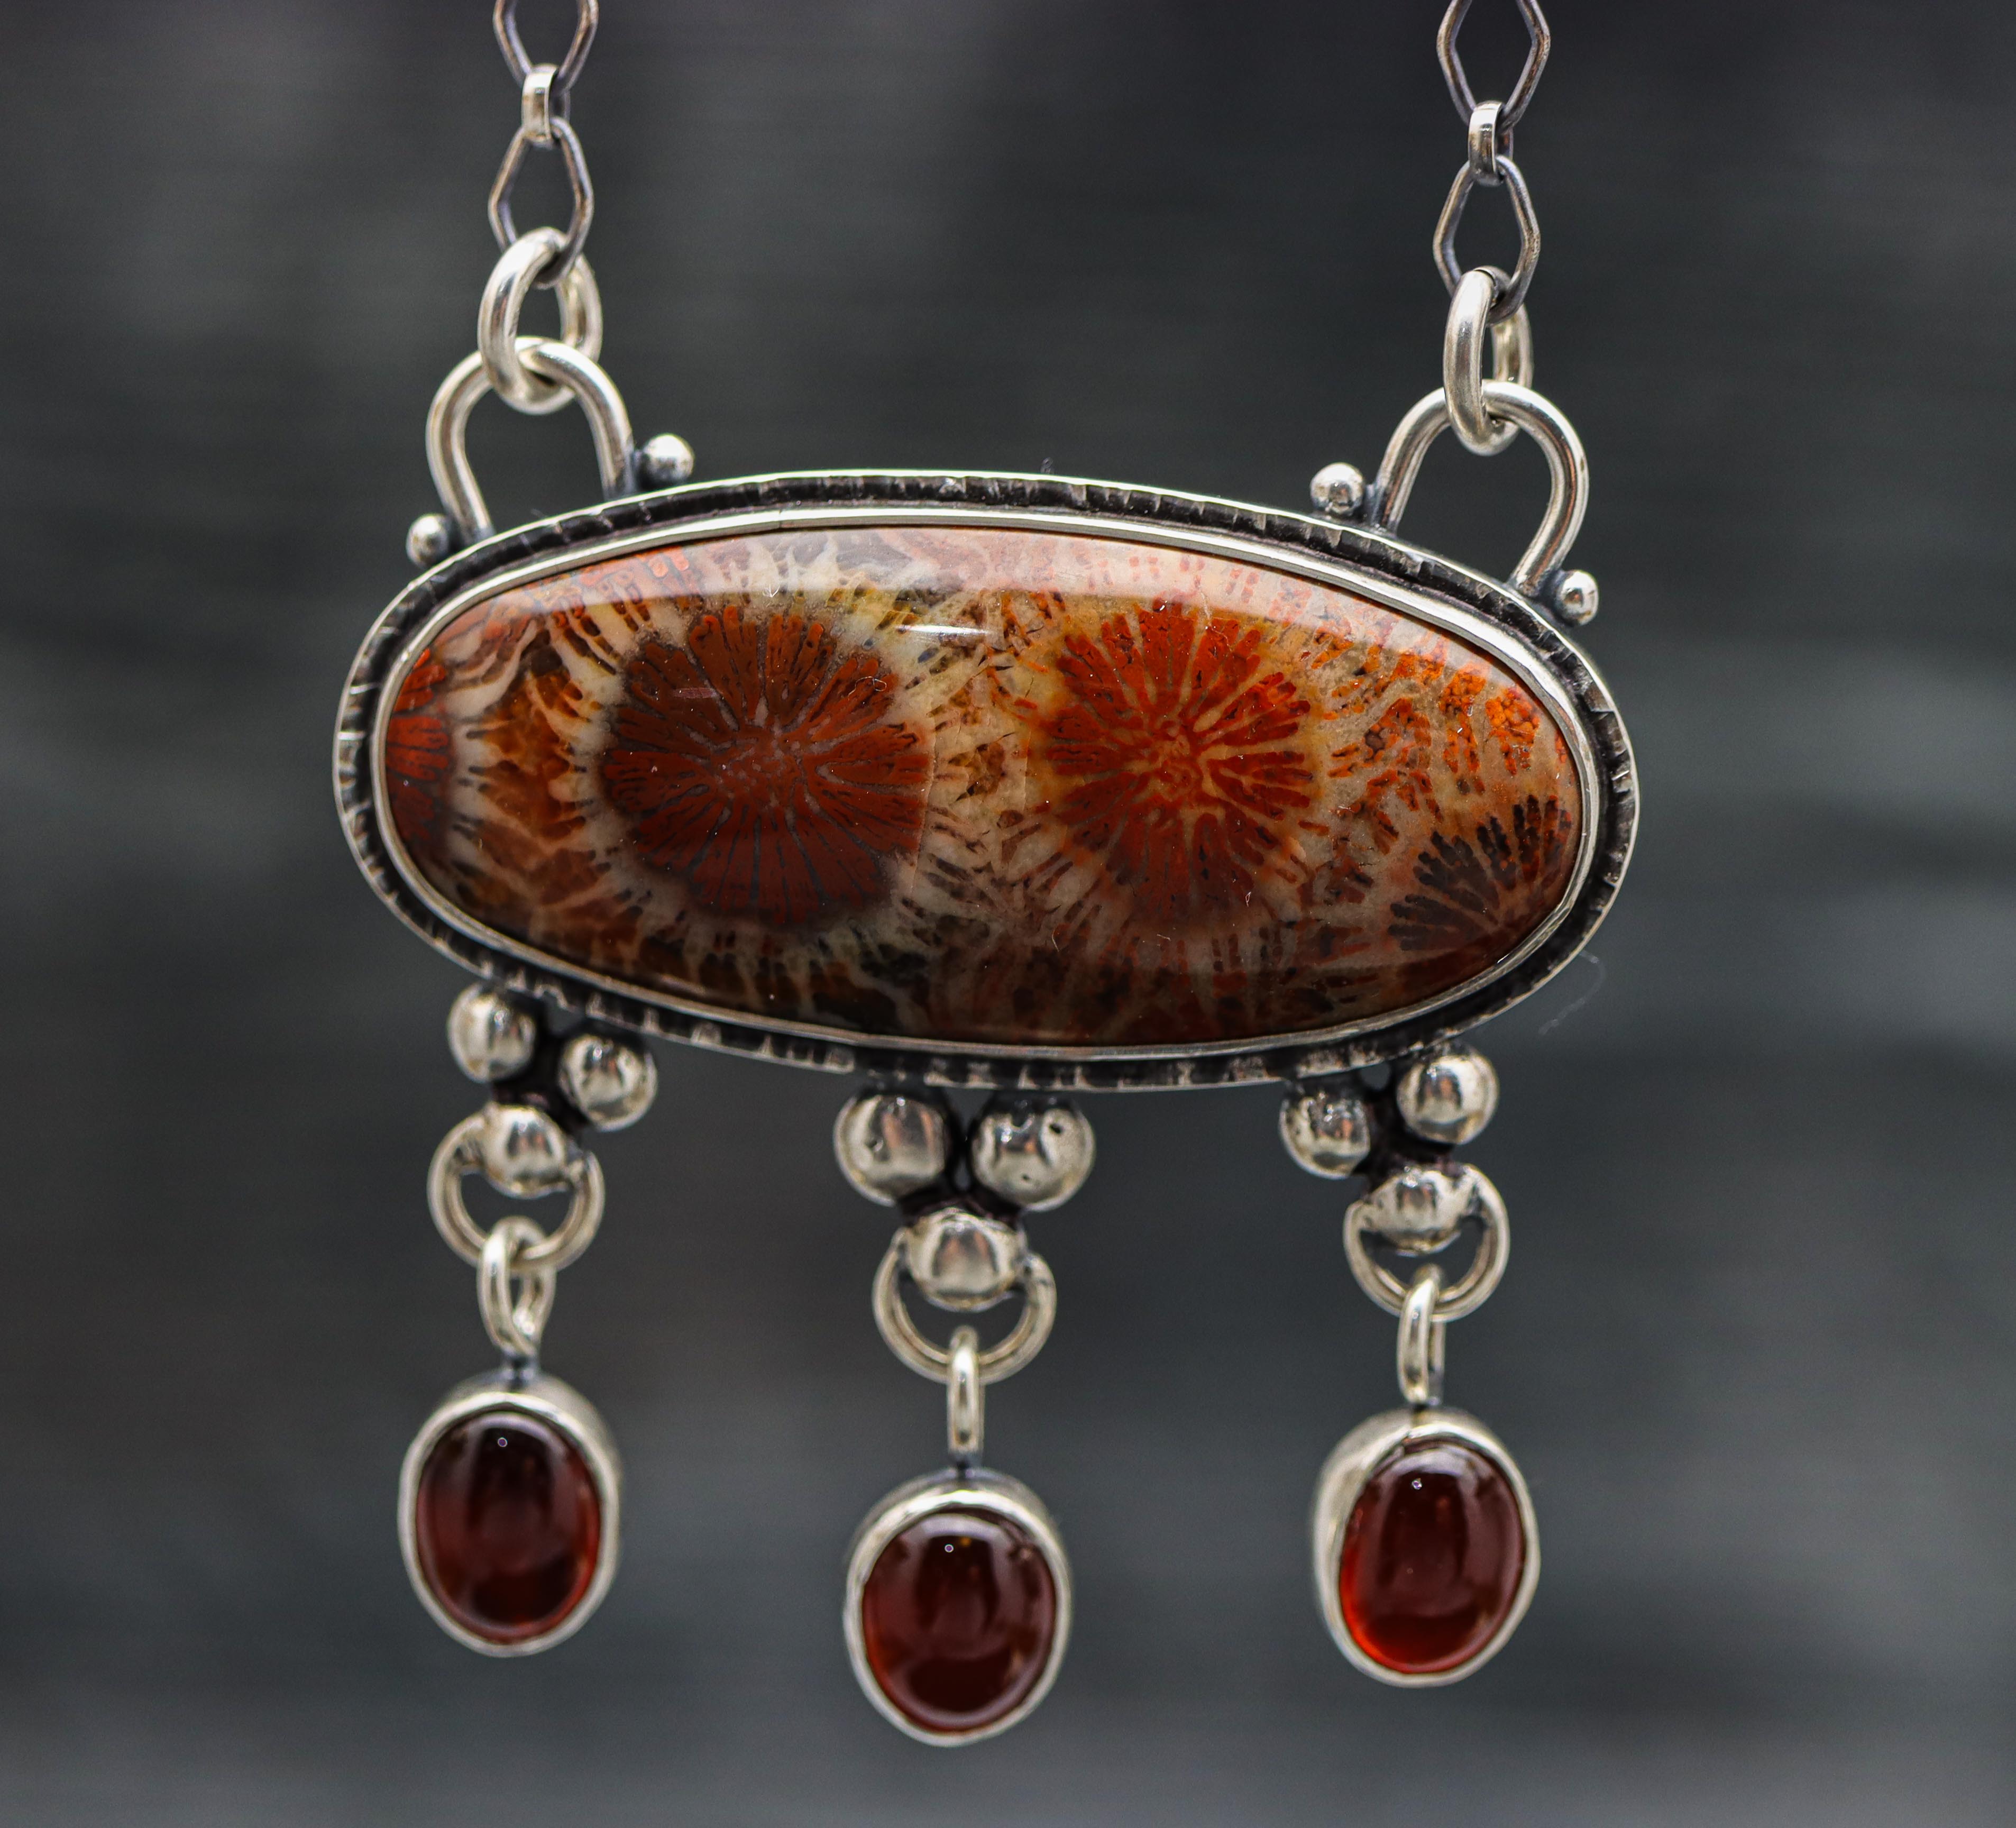 Fossil Co ral and Hessonite Garnet Pendant Sterling Silver One Of a Kind Gemstone Necklace